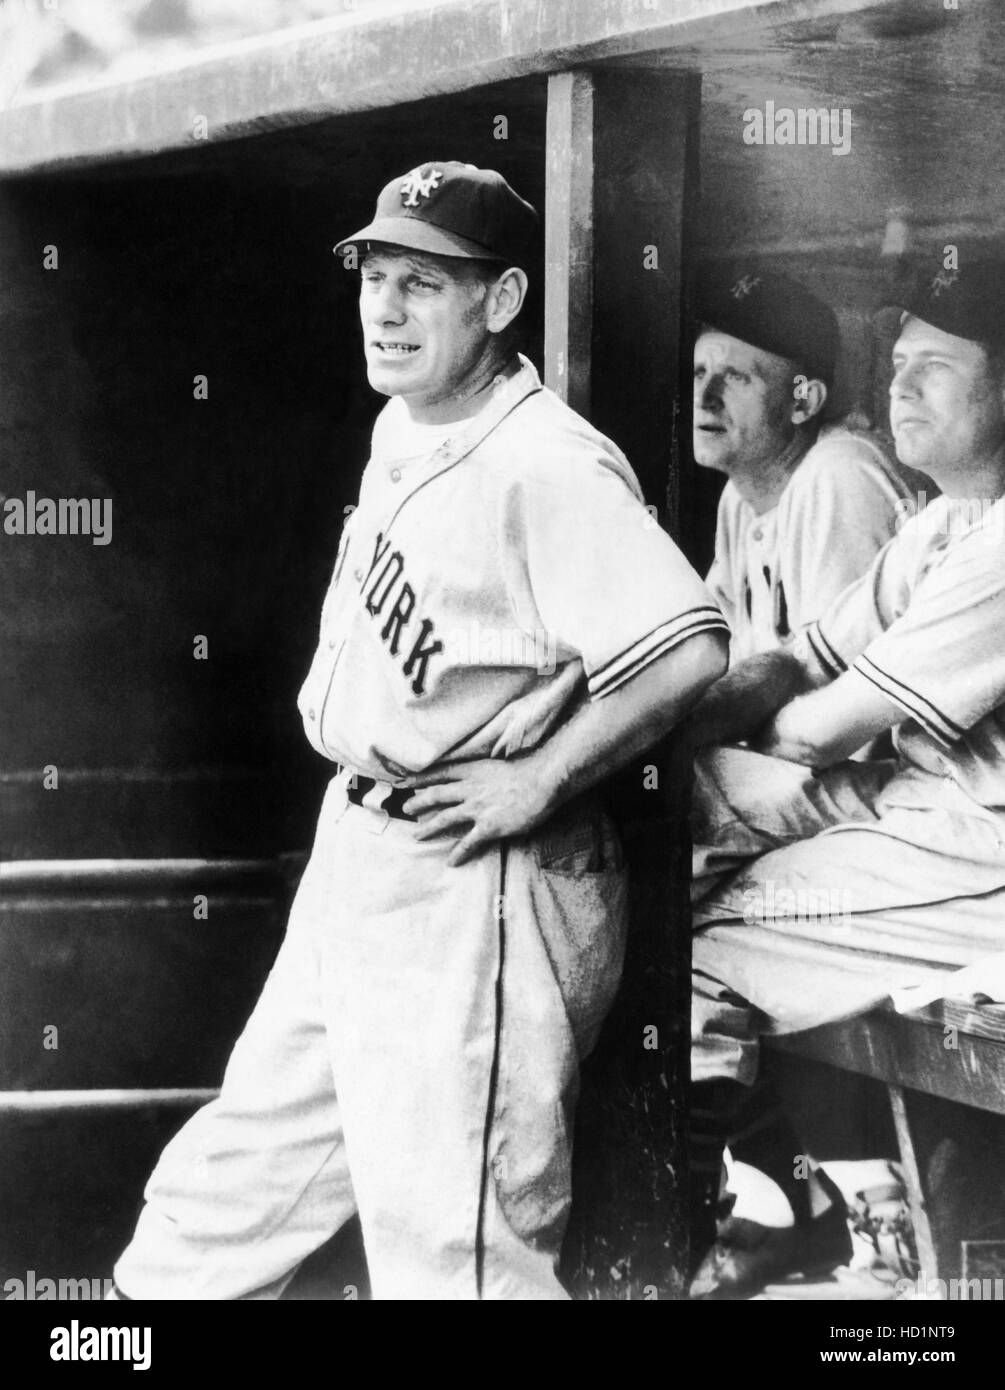 Leo Durocher, manager of the New York Giants from 1948 through 1955 standing in the dugout Stock Photo